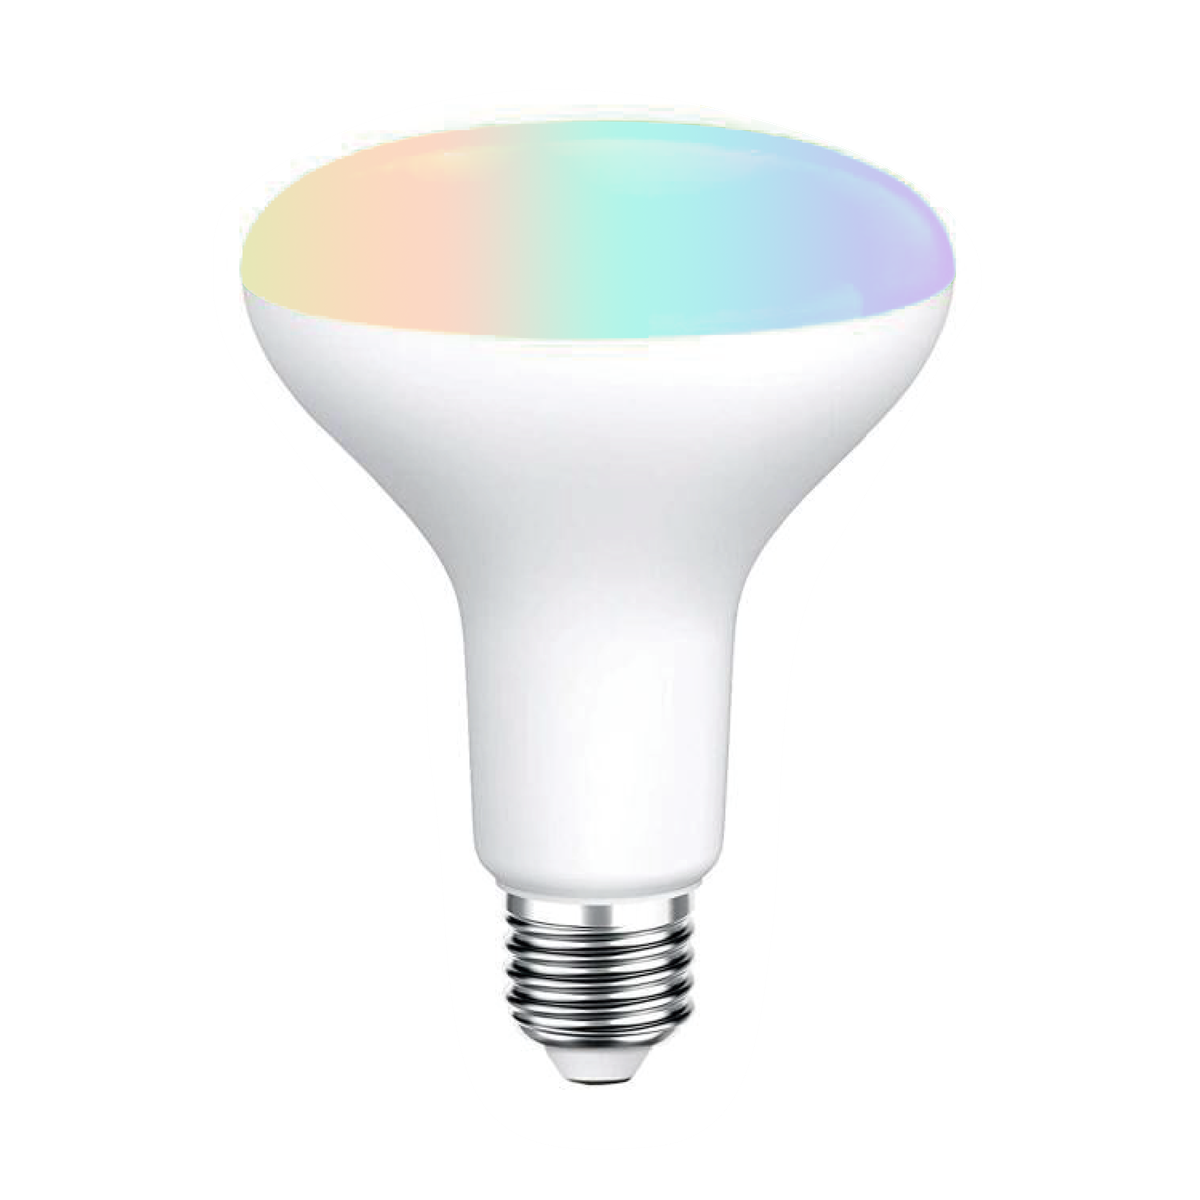 PriceList for Led Recessed Can Light - RGBCCT /CCT Smart Bulb PAR30 Light E26/E27/B22 With 16million Colors & tunable white/only tunable white CBP – C-Lux